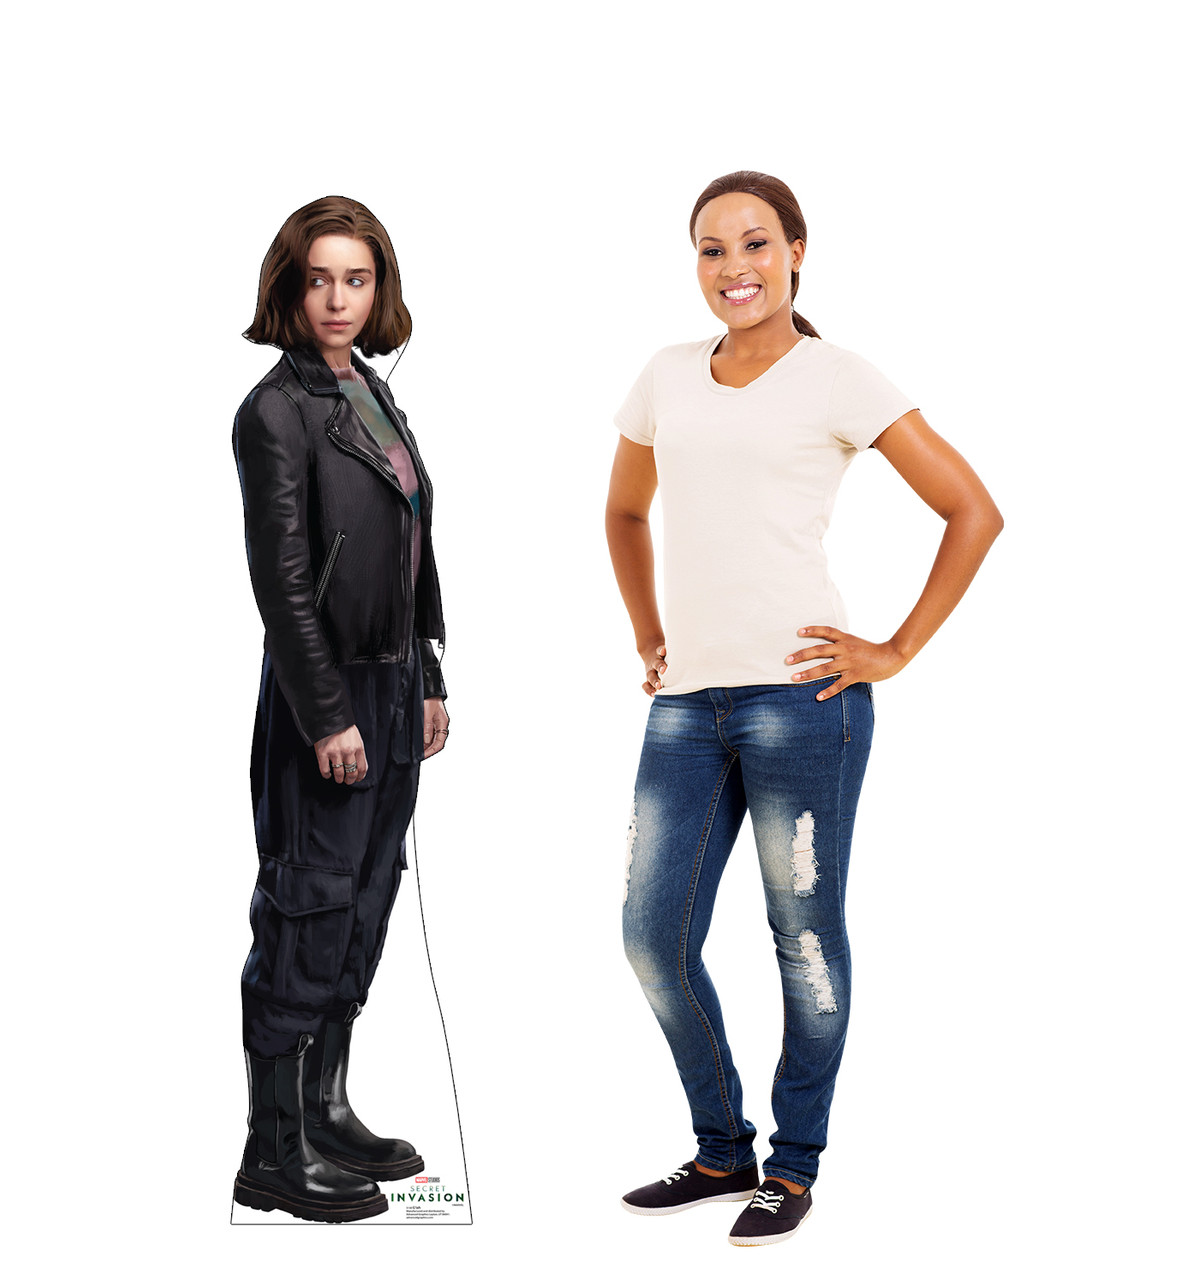 Life-size cardboard standee of G'iah with model.